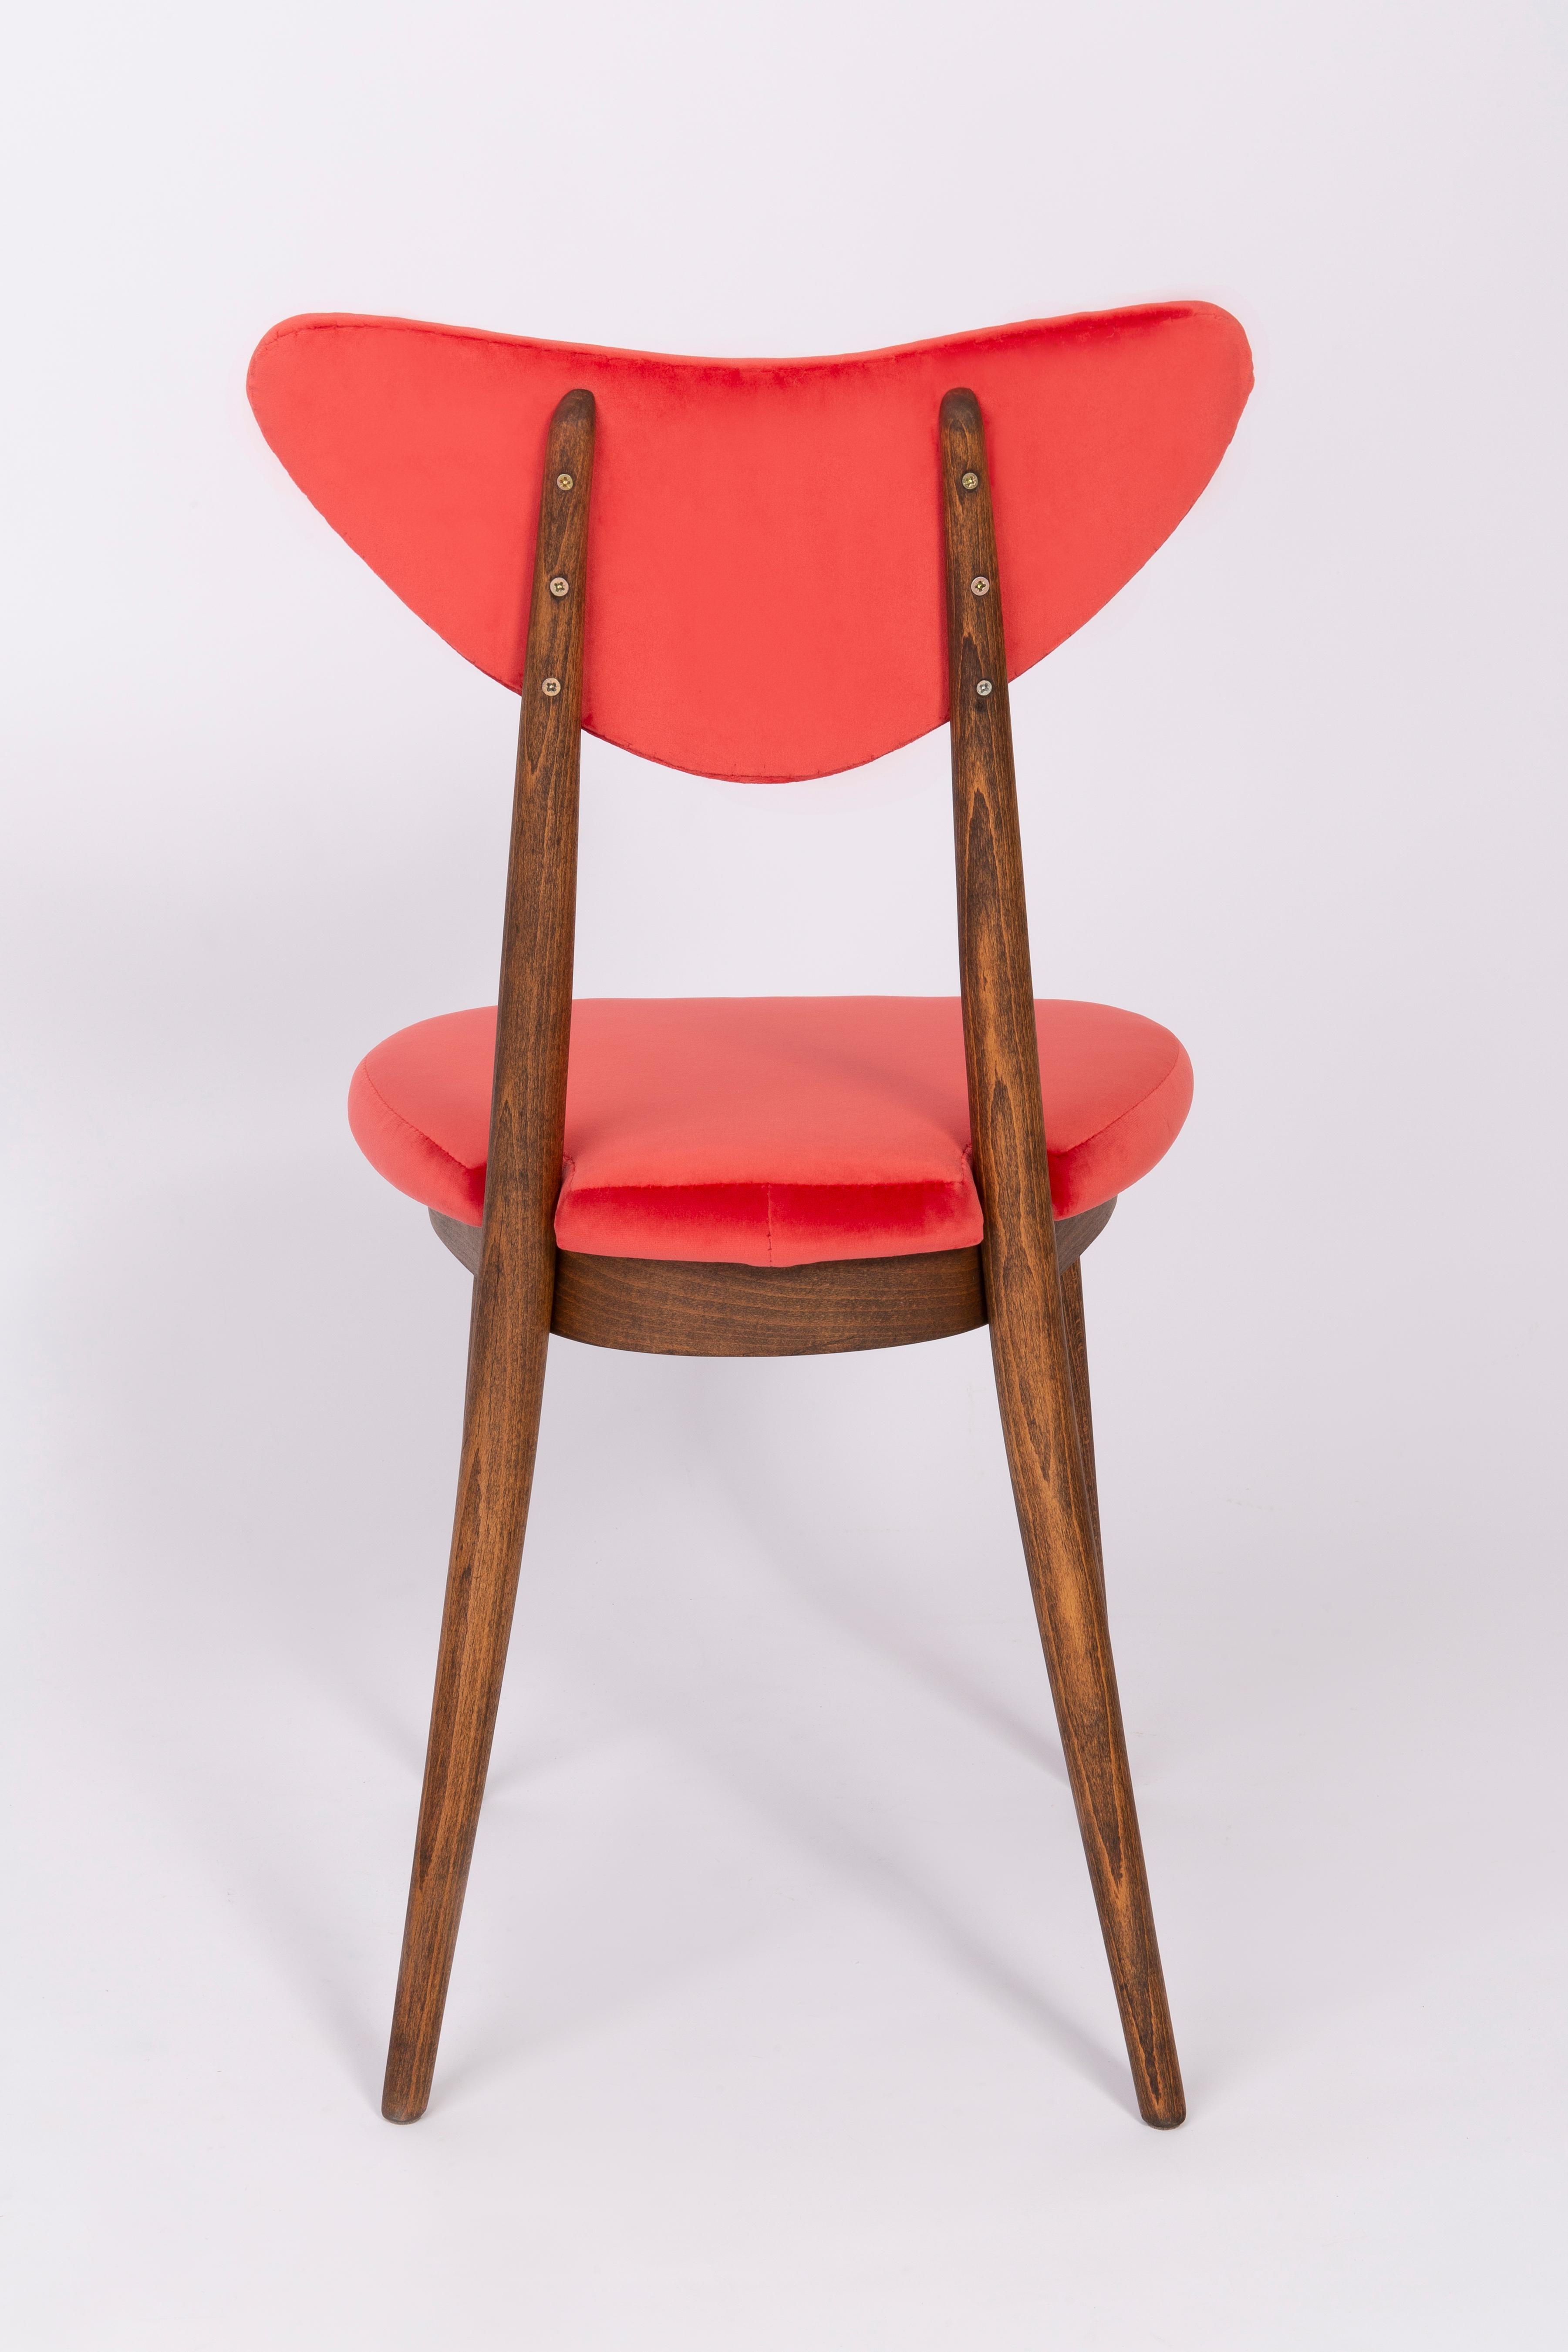 Set of Eight Red Heart Chairs, Poland, 1960s For Sale 1